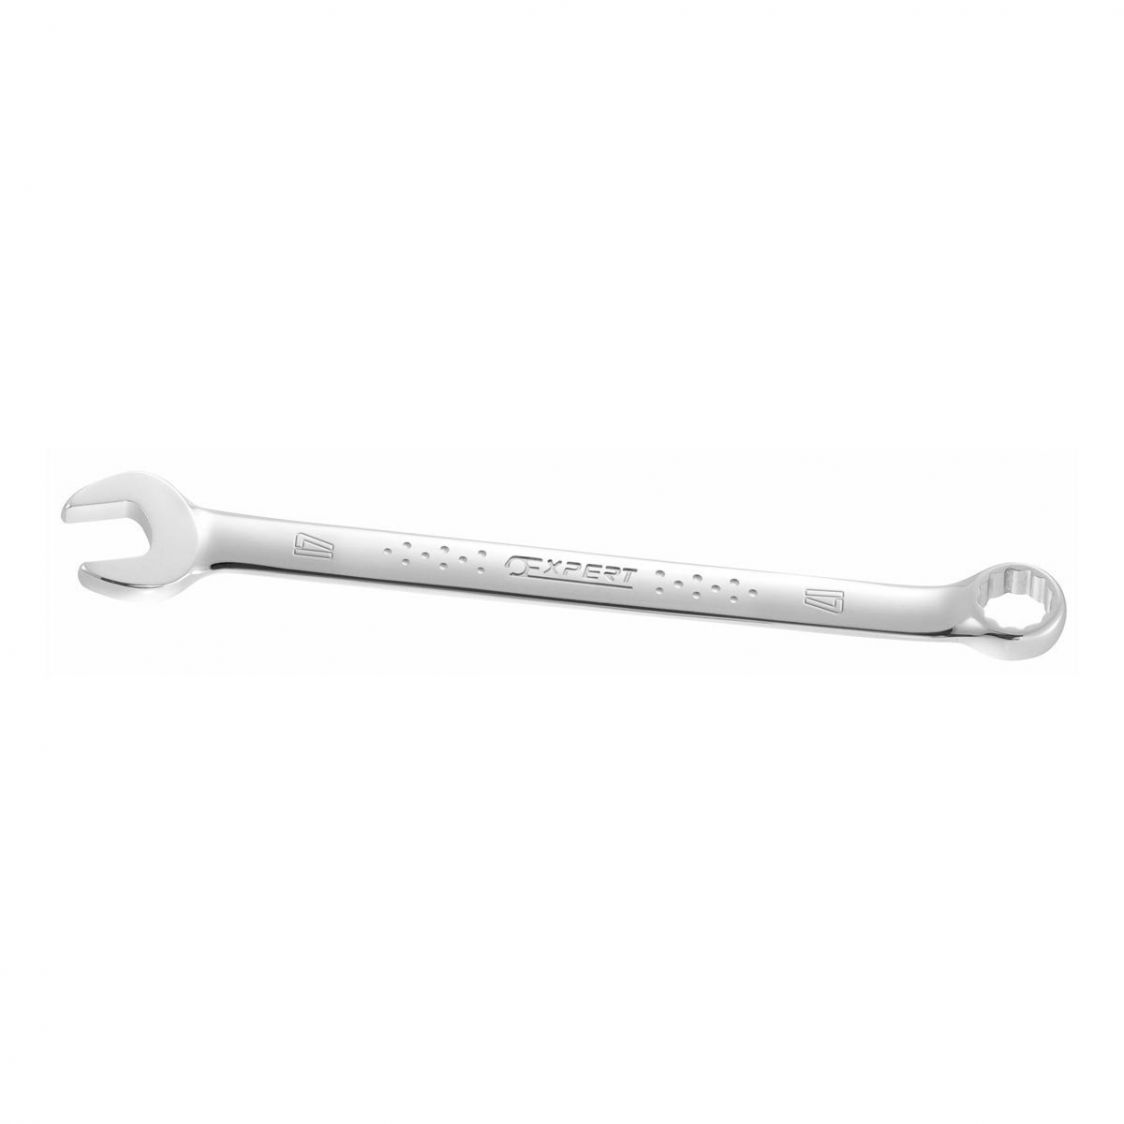 EXPERT by FACOM E110702 - 9mm Metric Long Combination Spanner